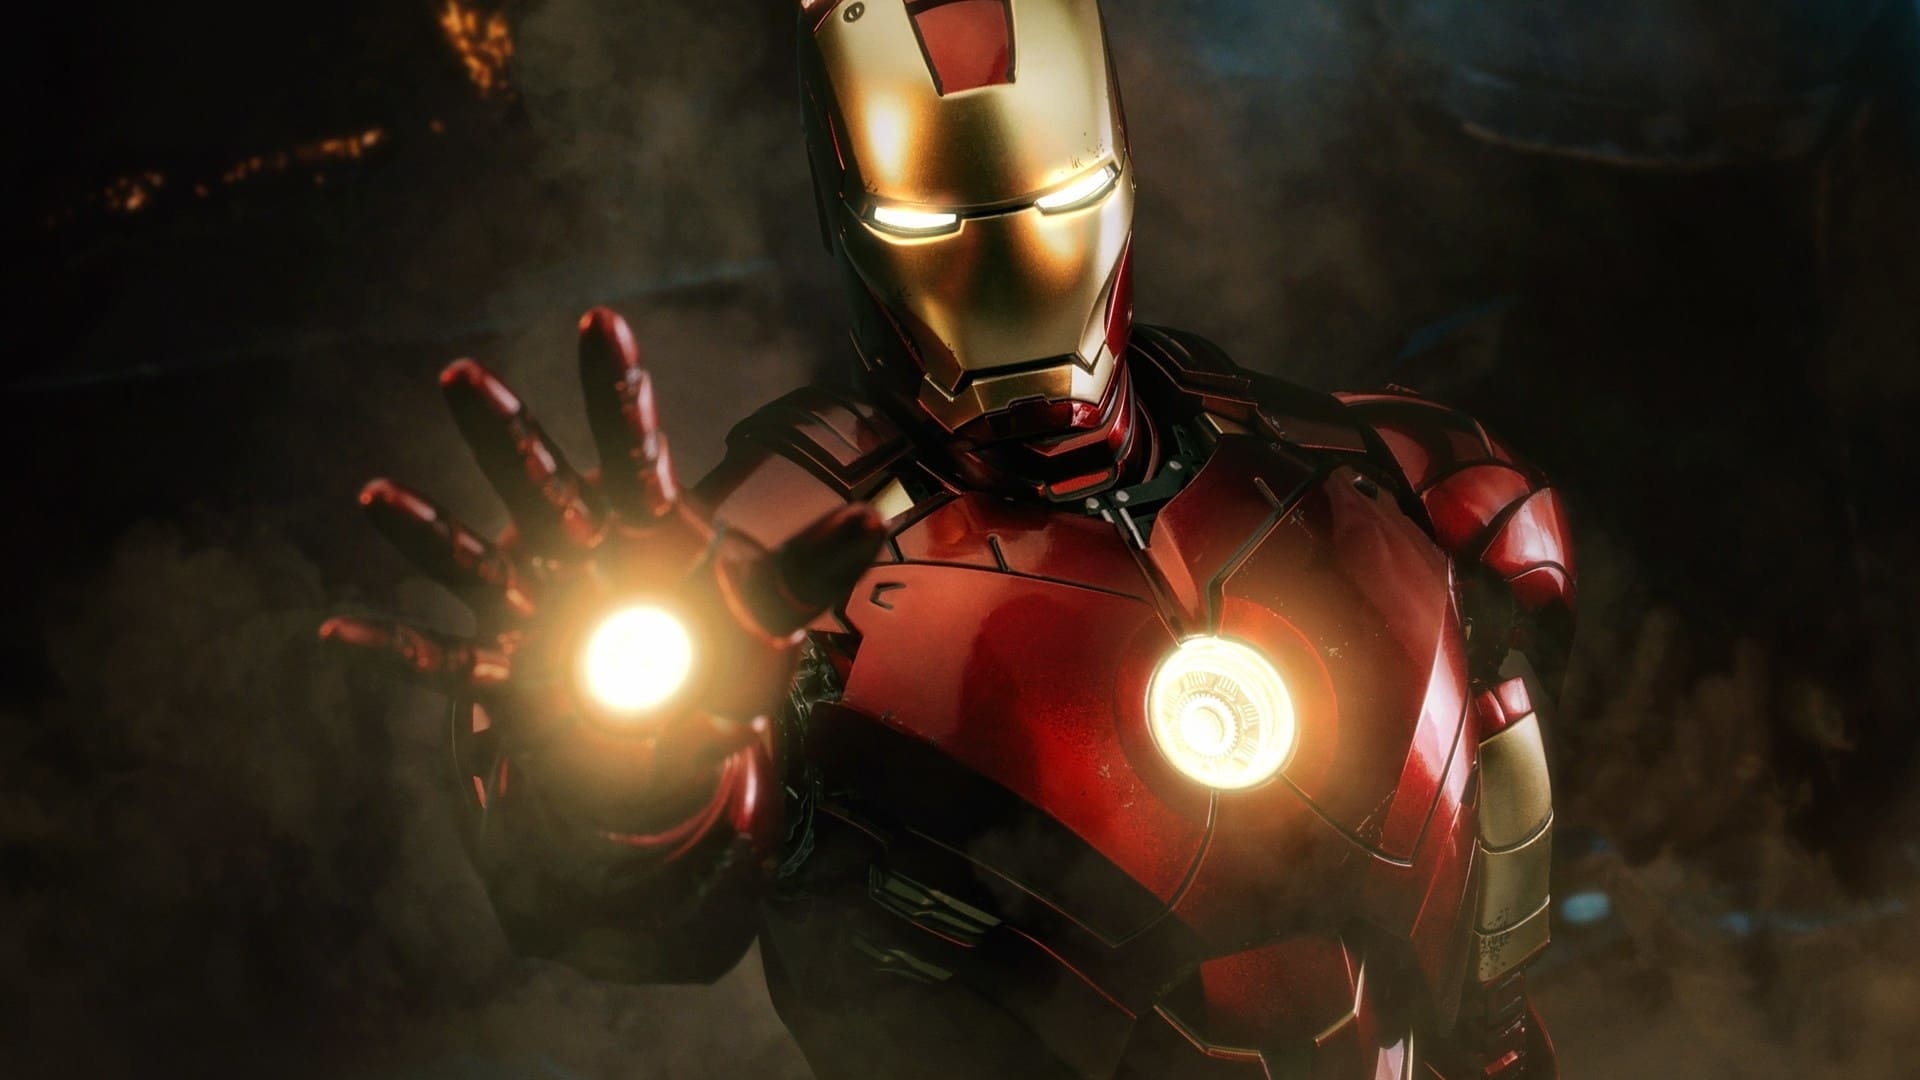 Iron Man wallpapers, High-quality images, Download pictures, Stunning backgrounds, 1920x1080 Full HD Desktop